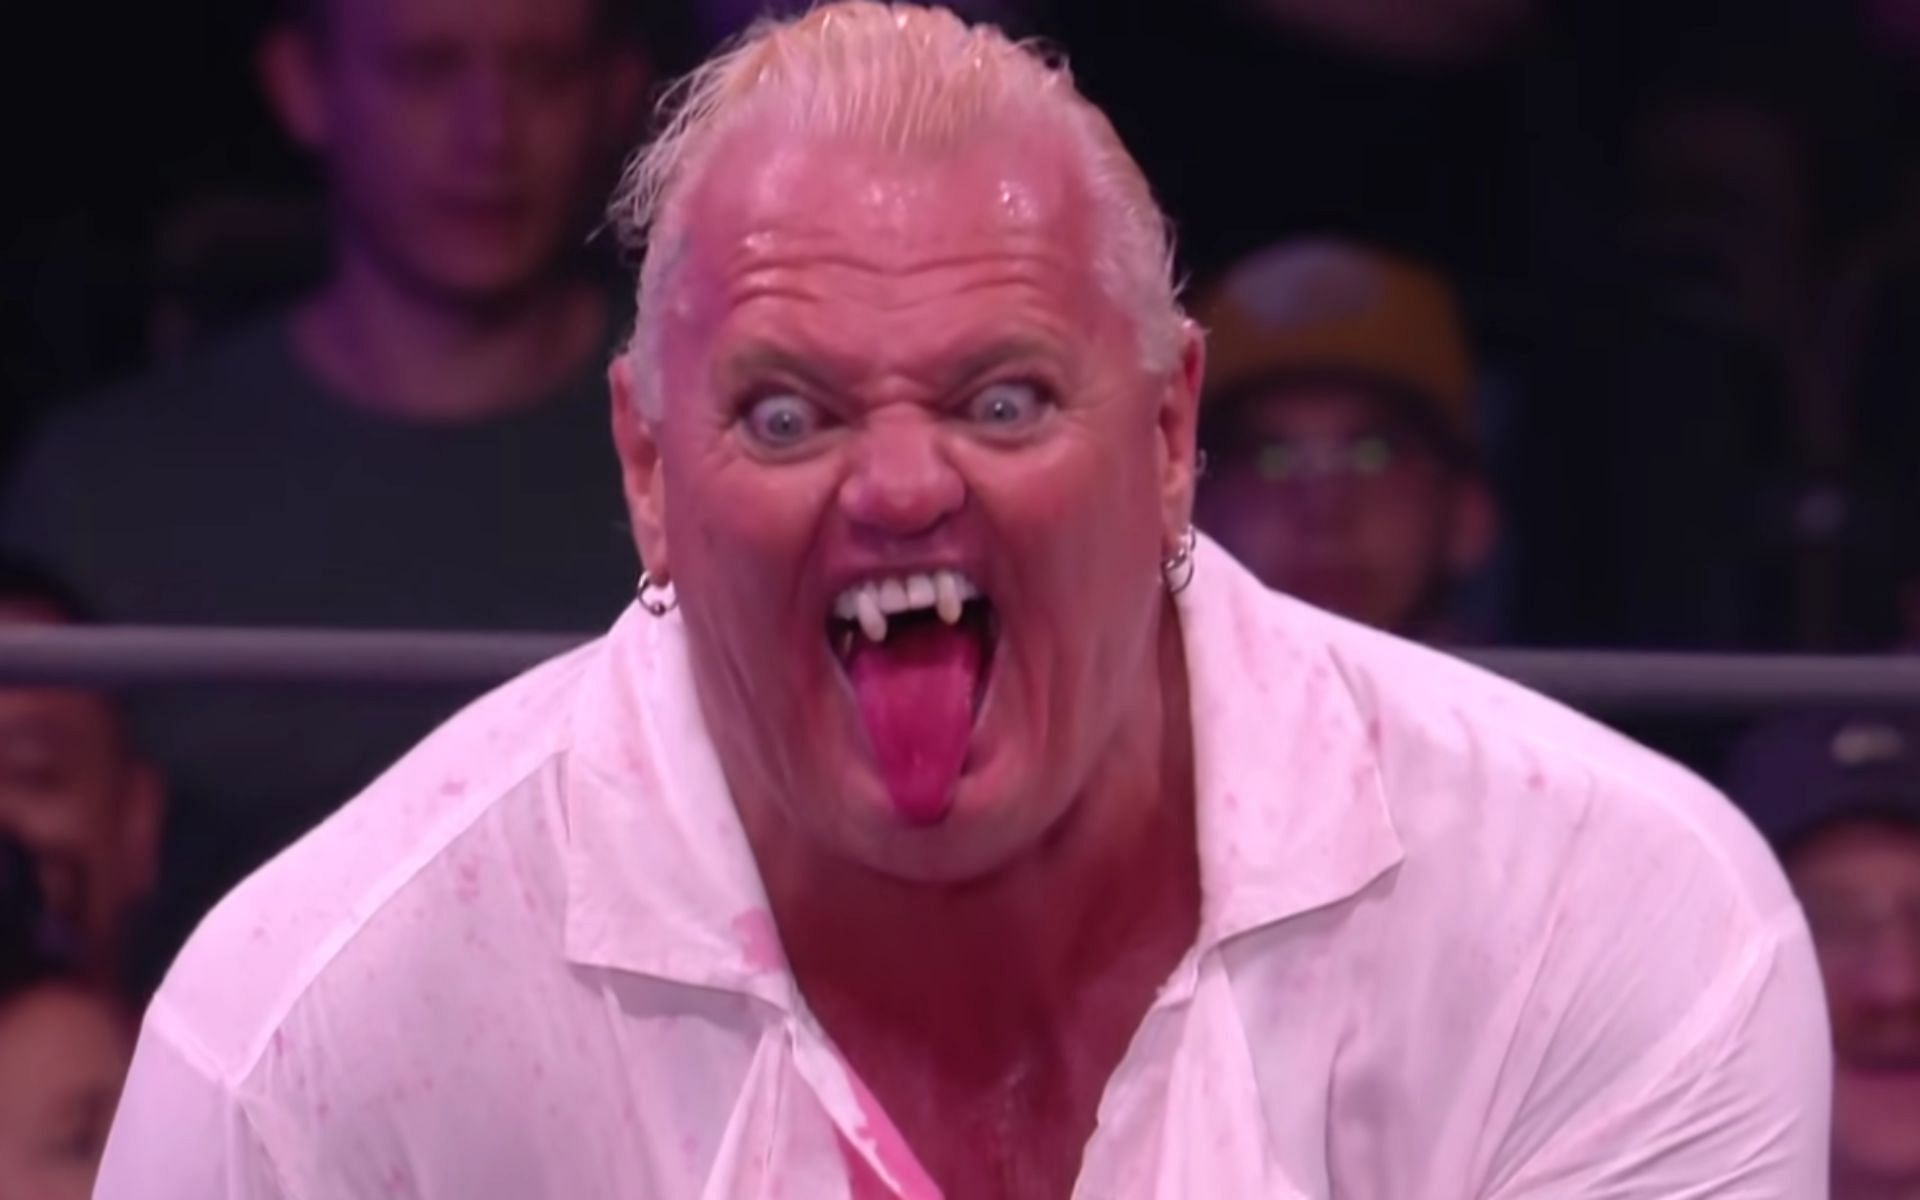 Gangrel was a leader of The Brood faction in WWE